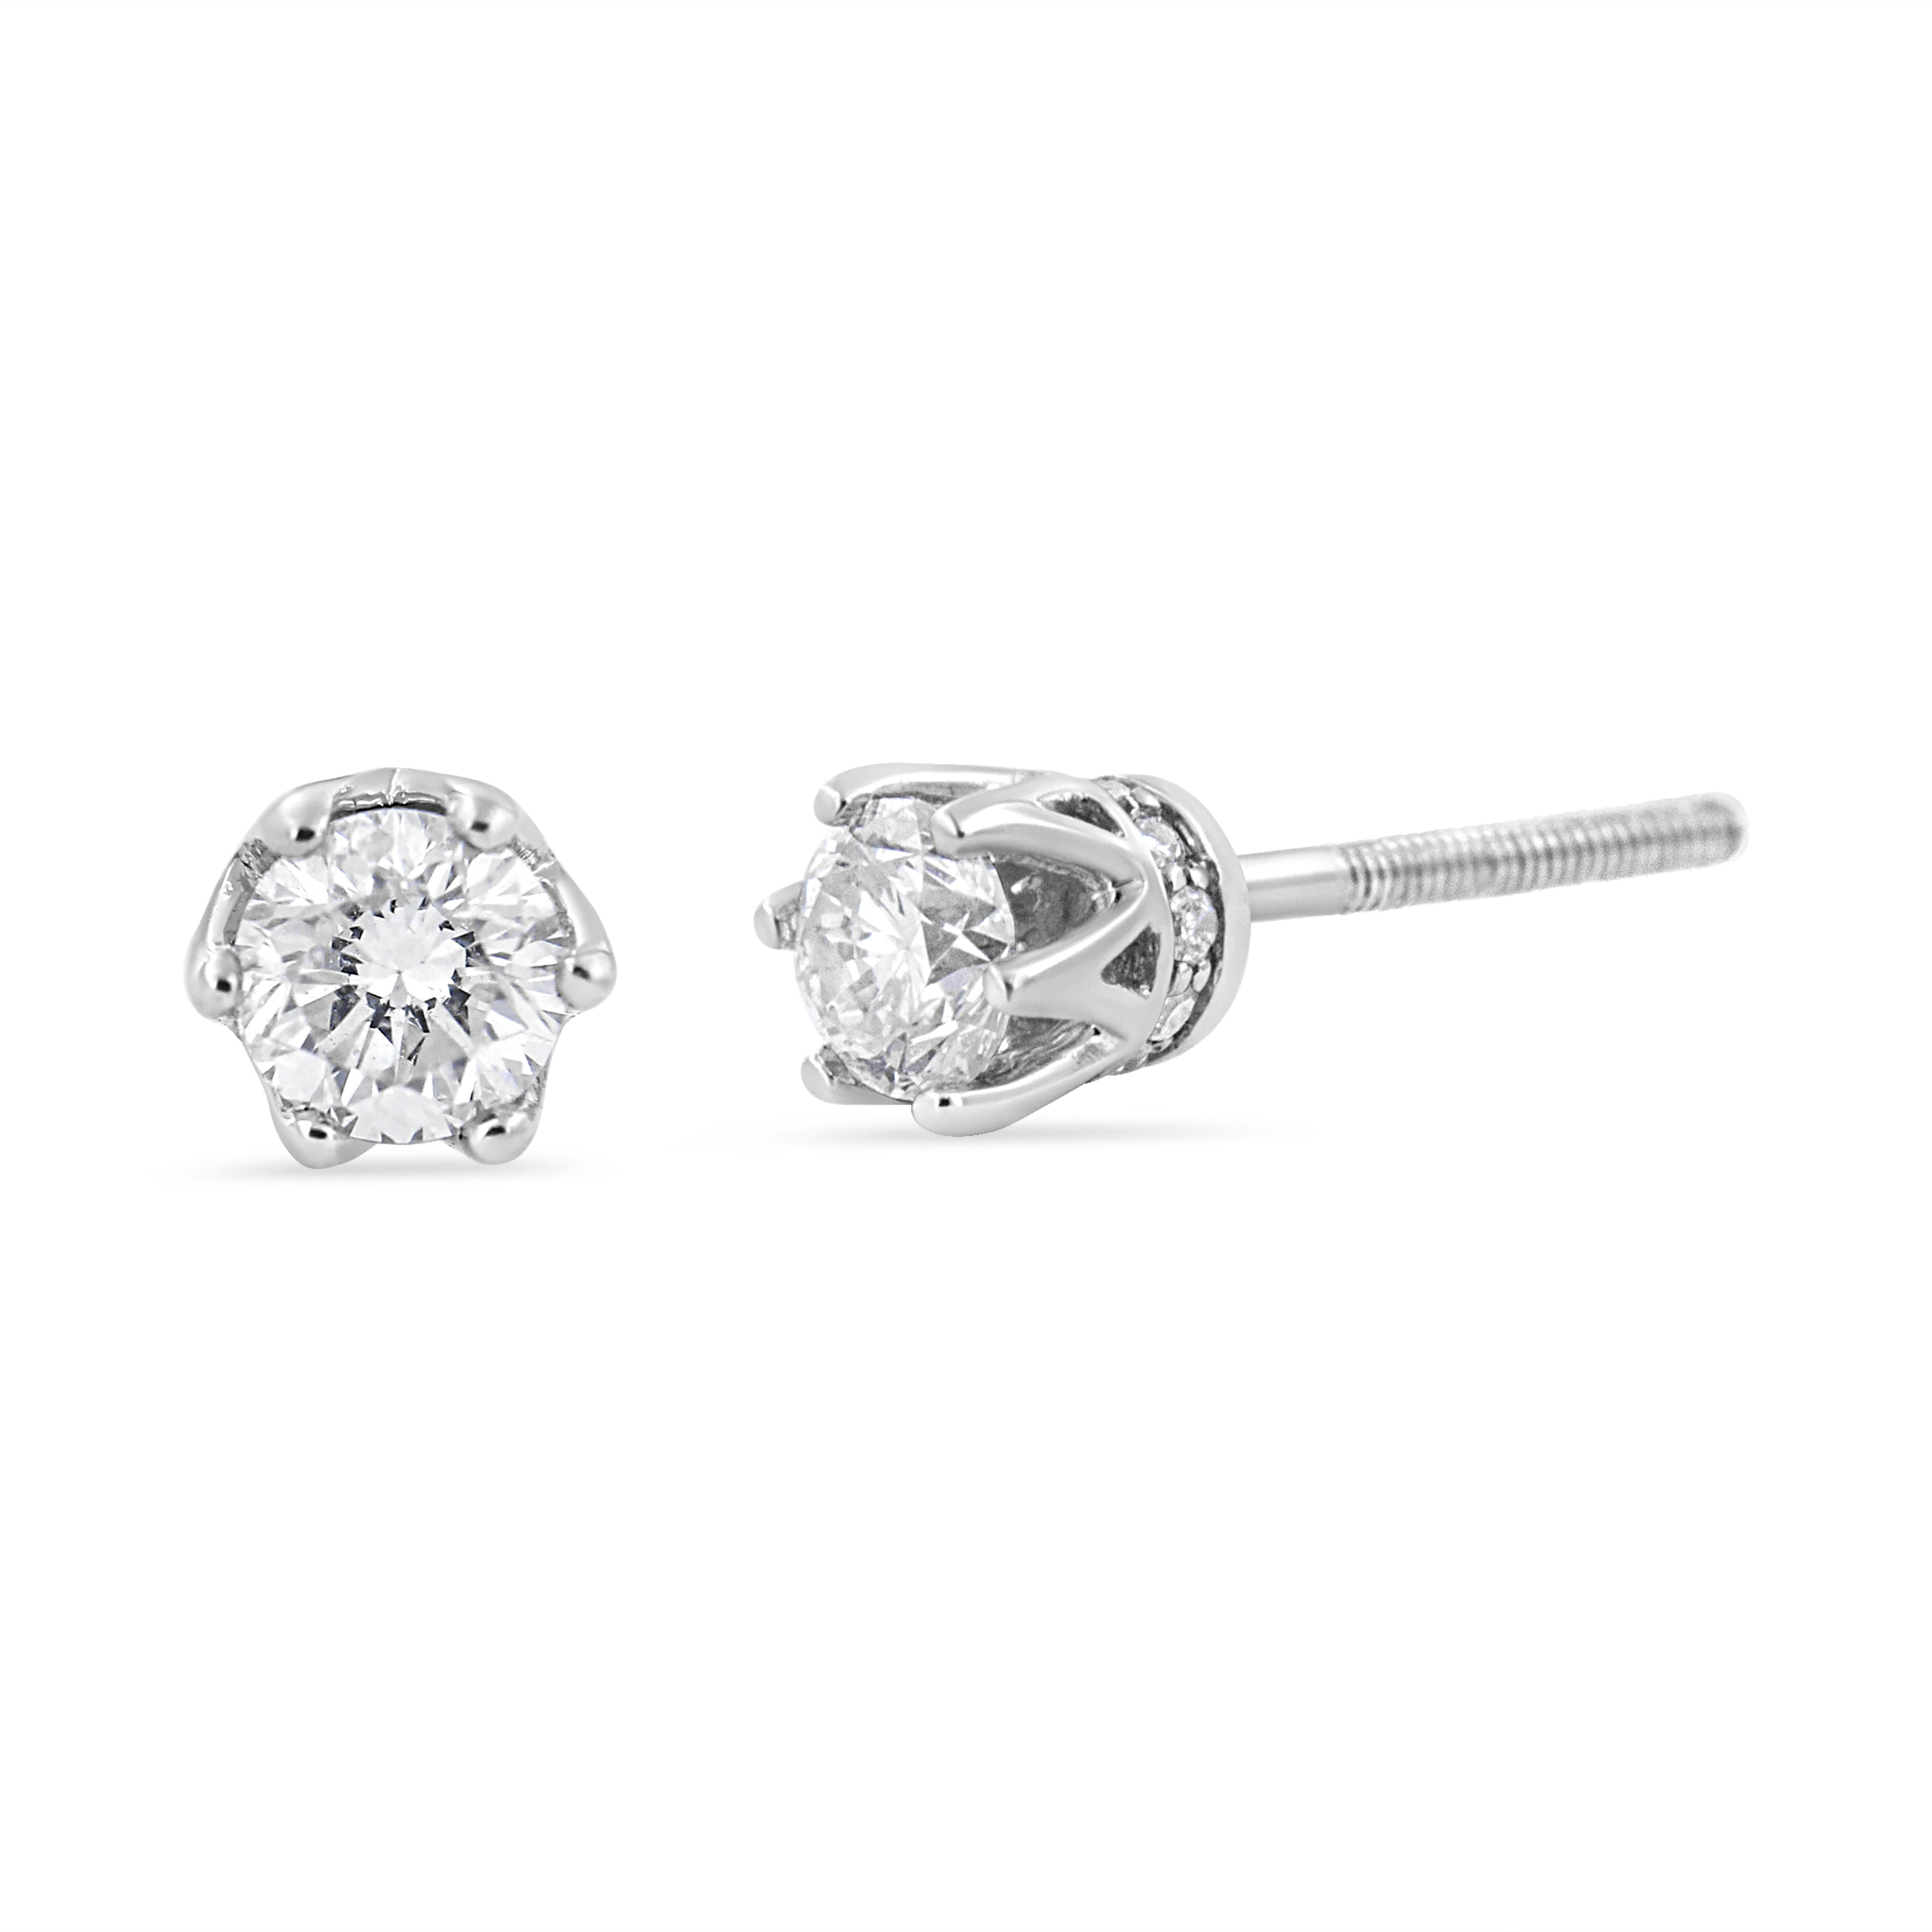 
Indulge in the allure of regal sophistication with our captivating diamond stud earrings. These 14kt white gold beauties are far from ordinary, boasting hidden details that will leave you breathless.

From the front, these studs exude an air of